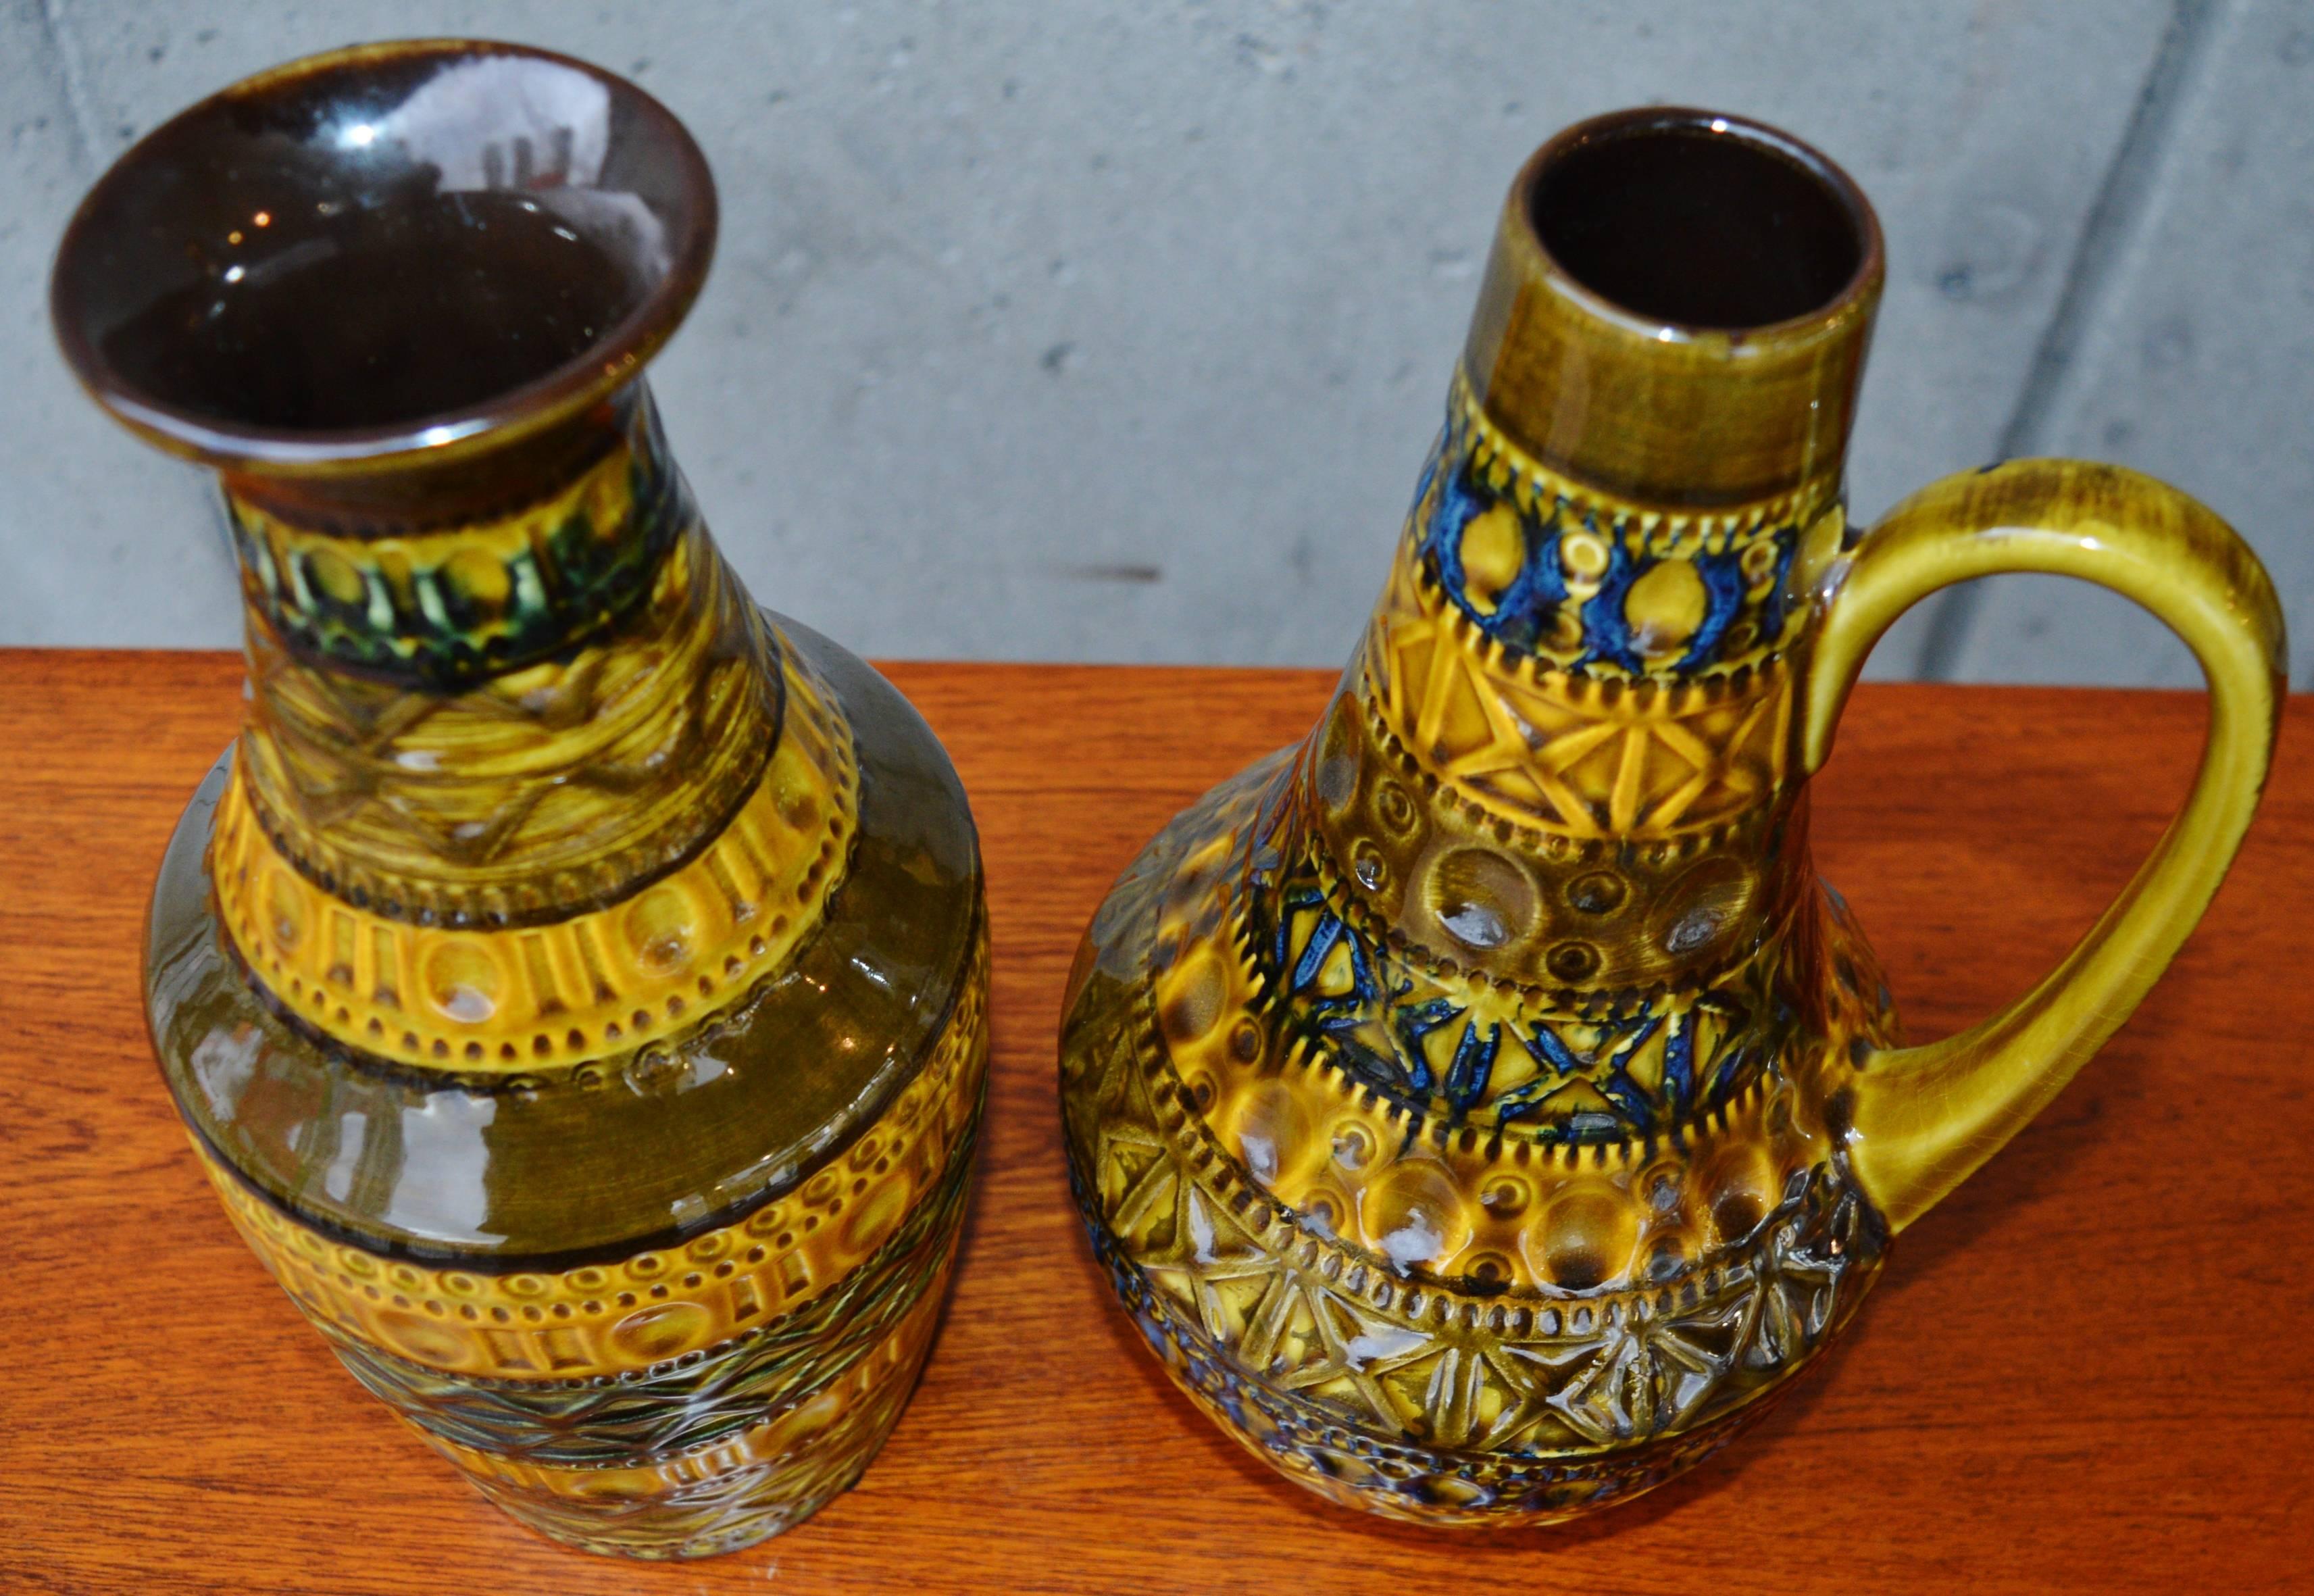 This striking pair of West German Mid-Century Modern accent pieces are in a gorgeous palette that will complement any decor. Beautifully constructed and textural, one a vase, the other a pitcher, both were designed in the 1960s and made by Bay